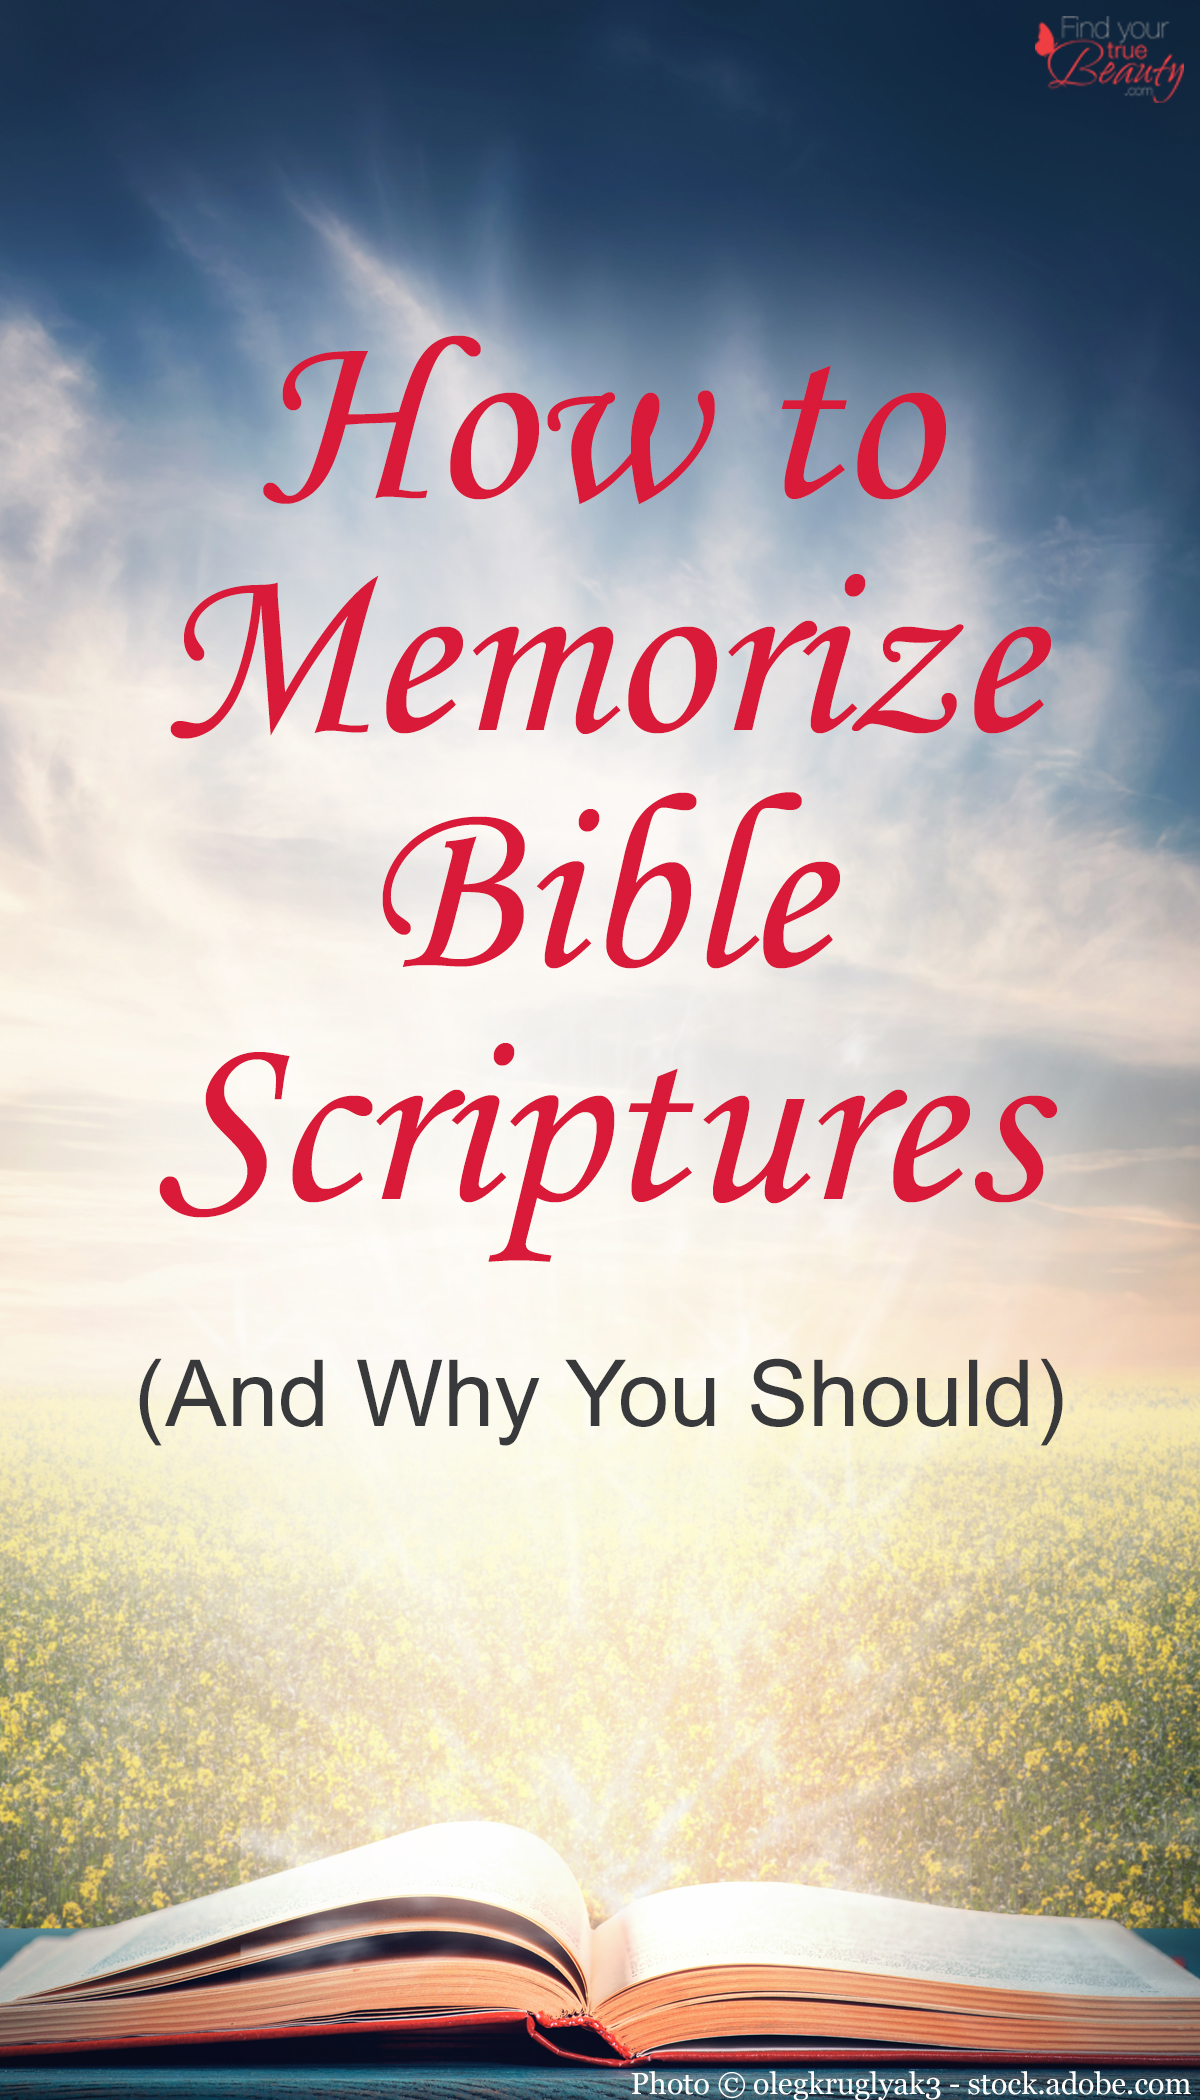 How to memorize Bible scriptures (and why you should)